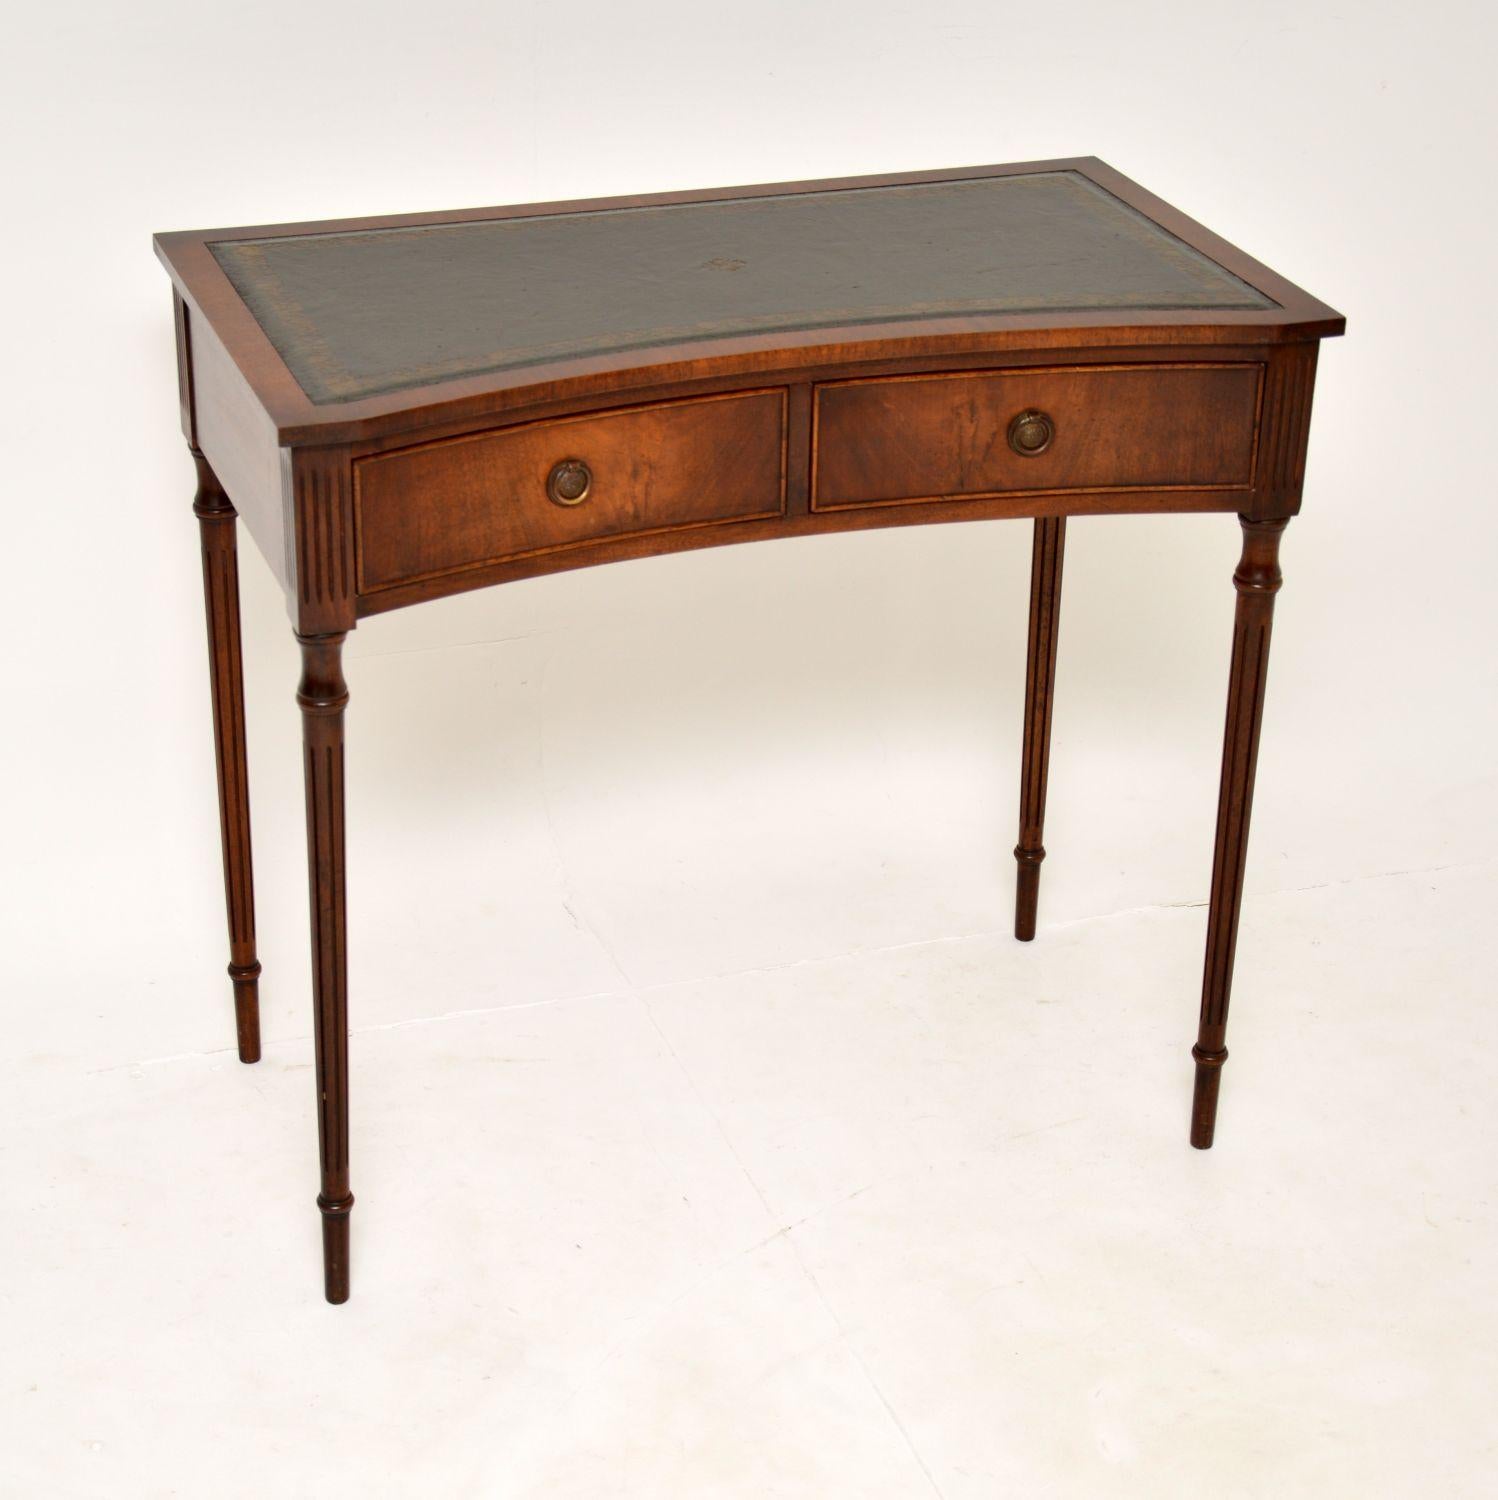 A beautiful and elegant concave fronted writing table in the antique Regency style. This was made in England & I would date it from around the 1950’s period.

It has a wonderful design and shape and is of excellent quality. The concave drawers